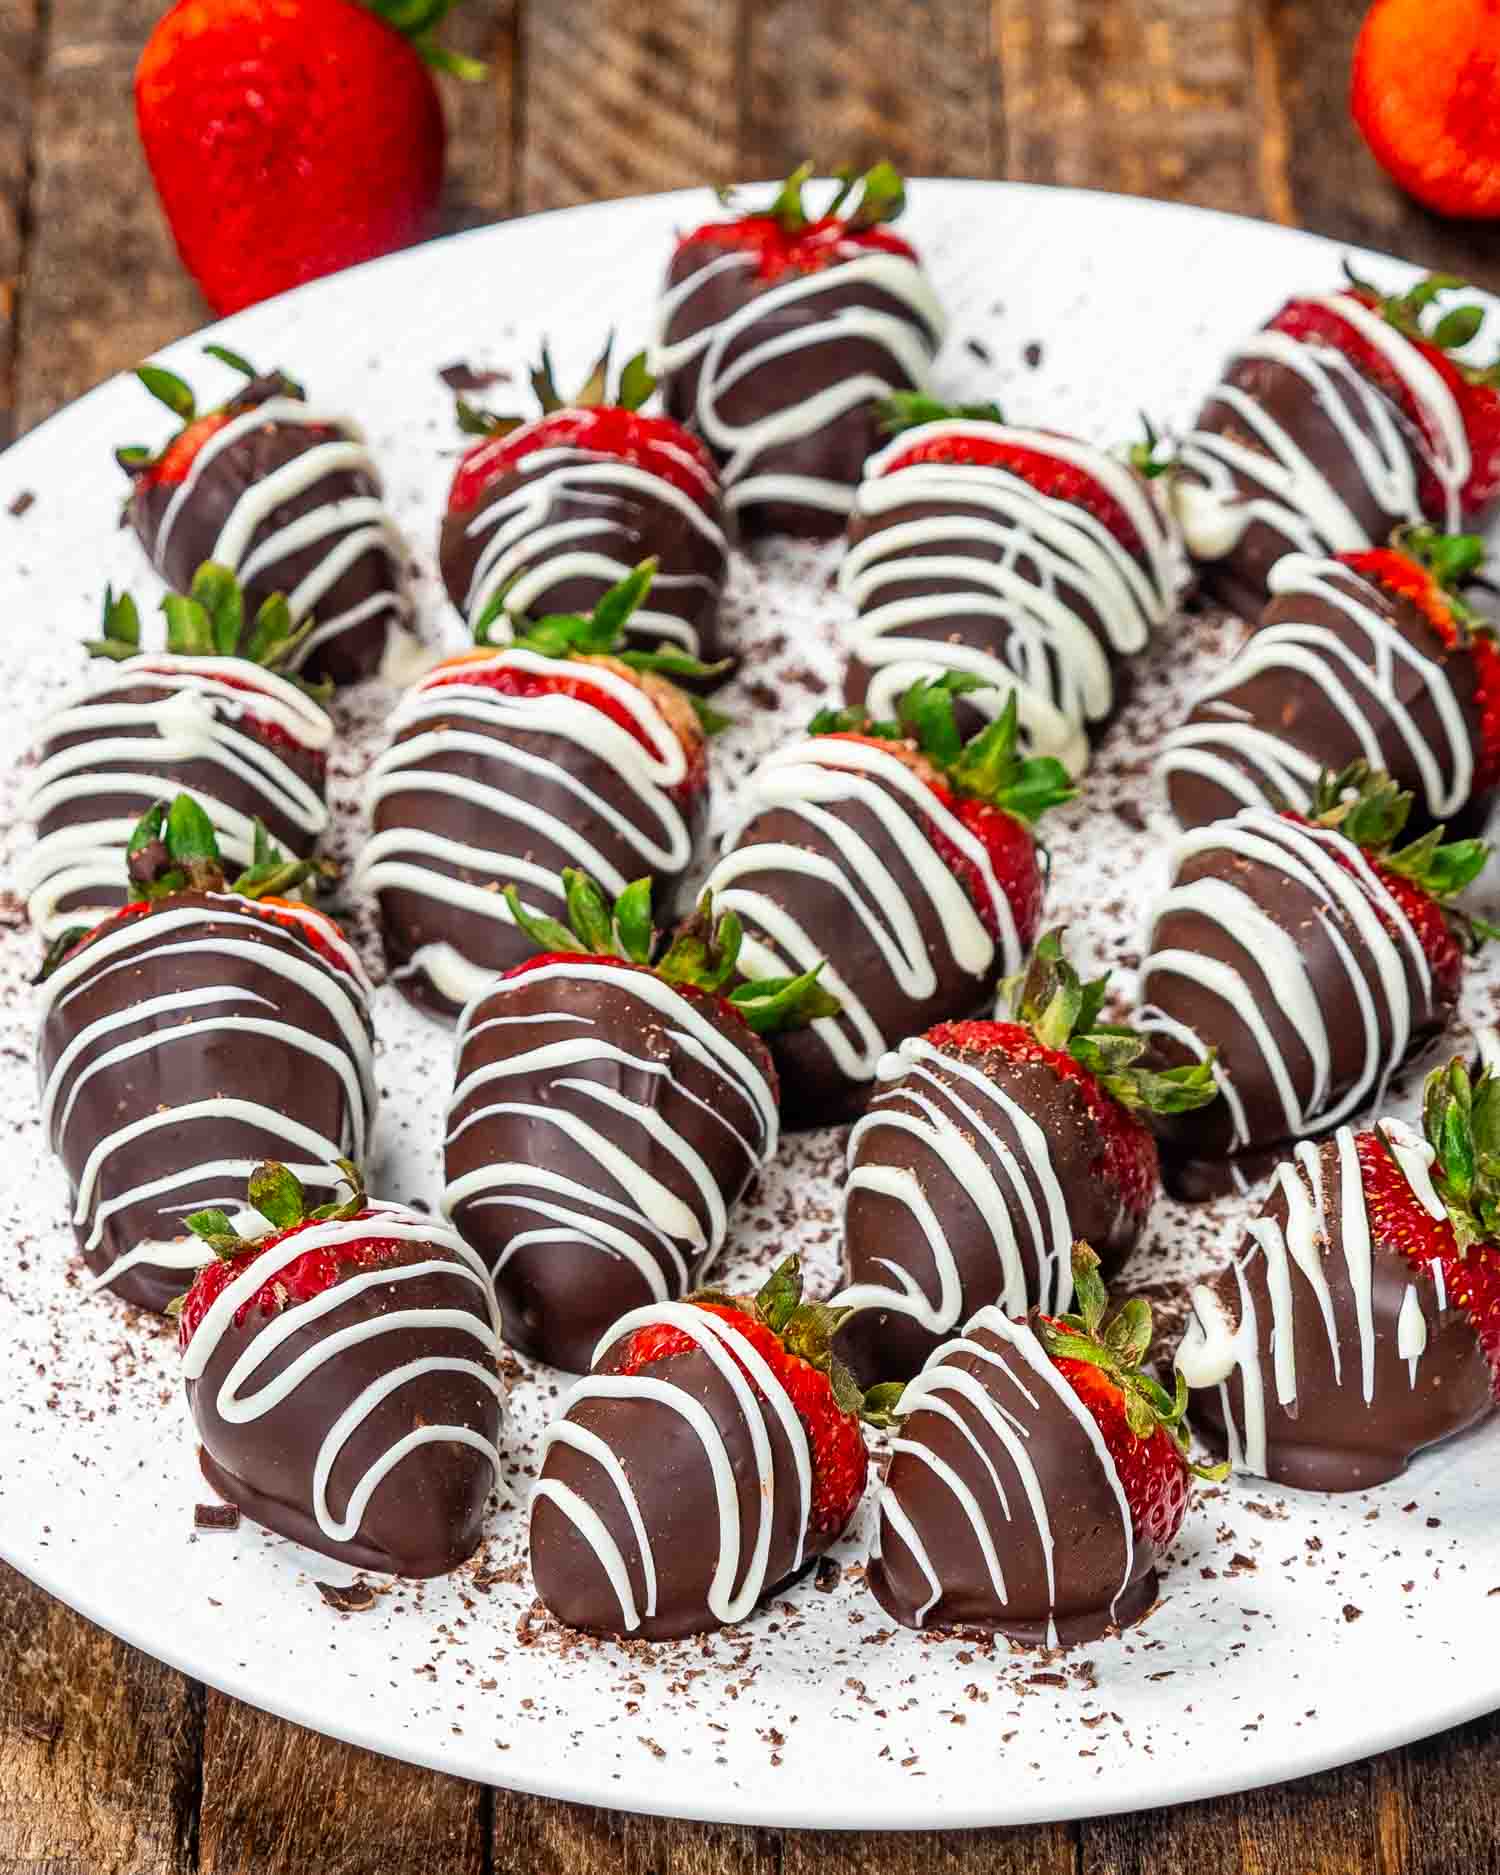 A plate of chocolate-covered strawberries with white chocolate drizzle, ready for a sweet Valentine's treat.